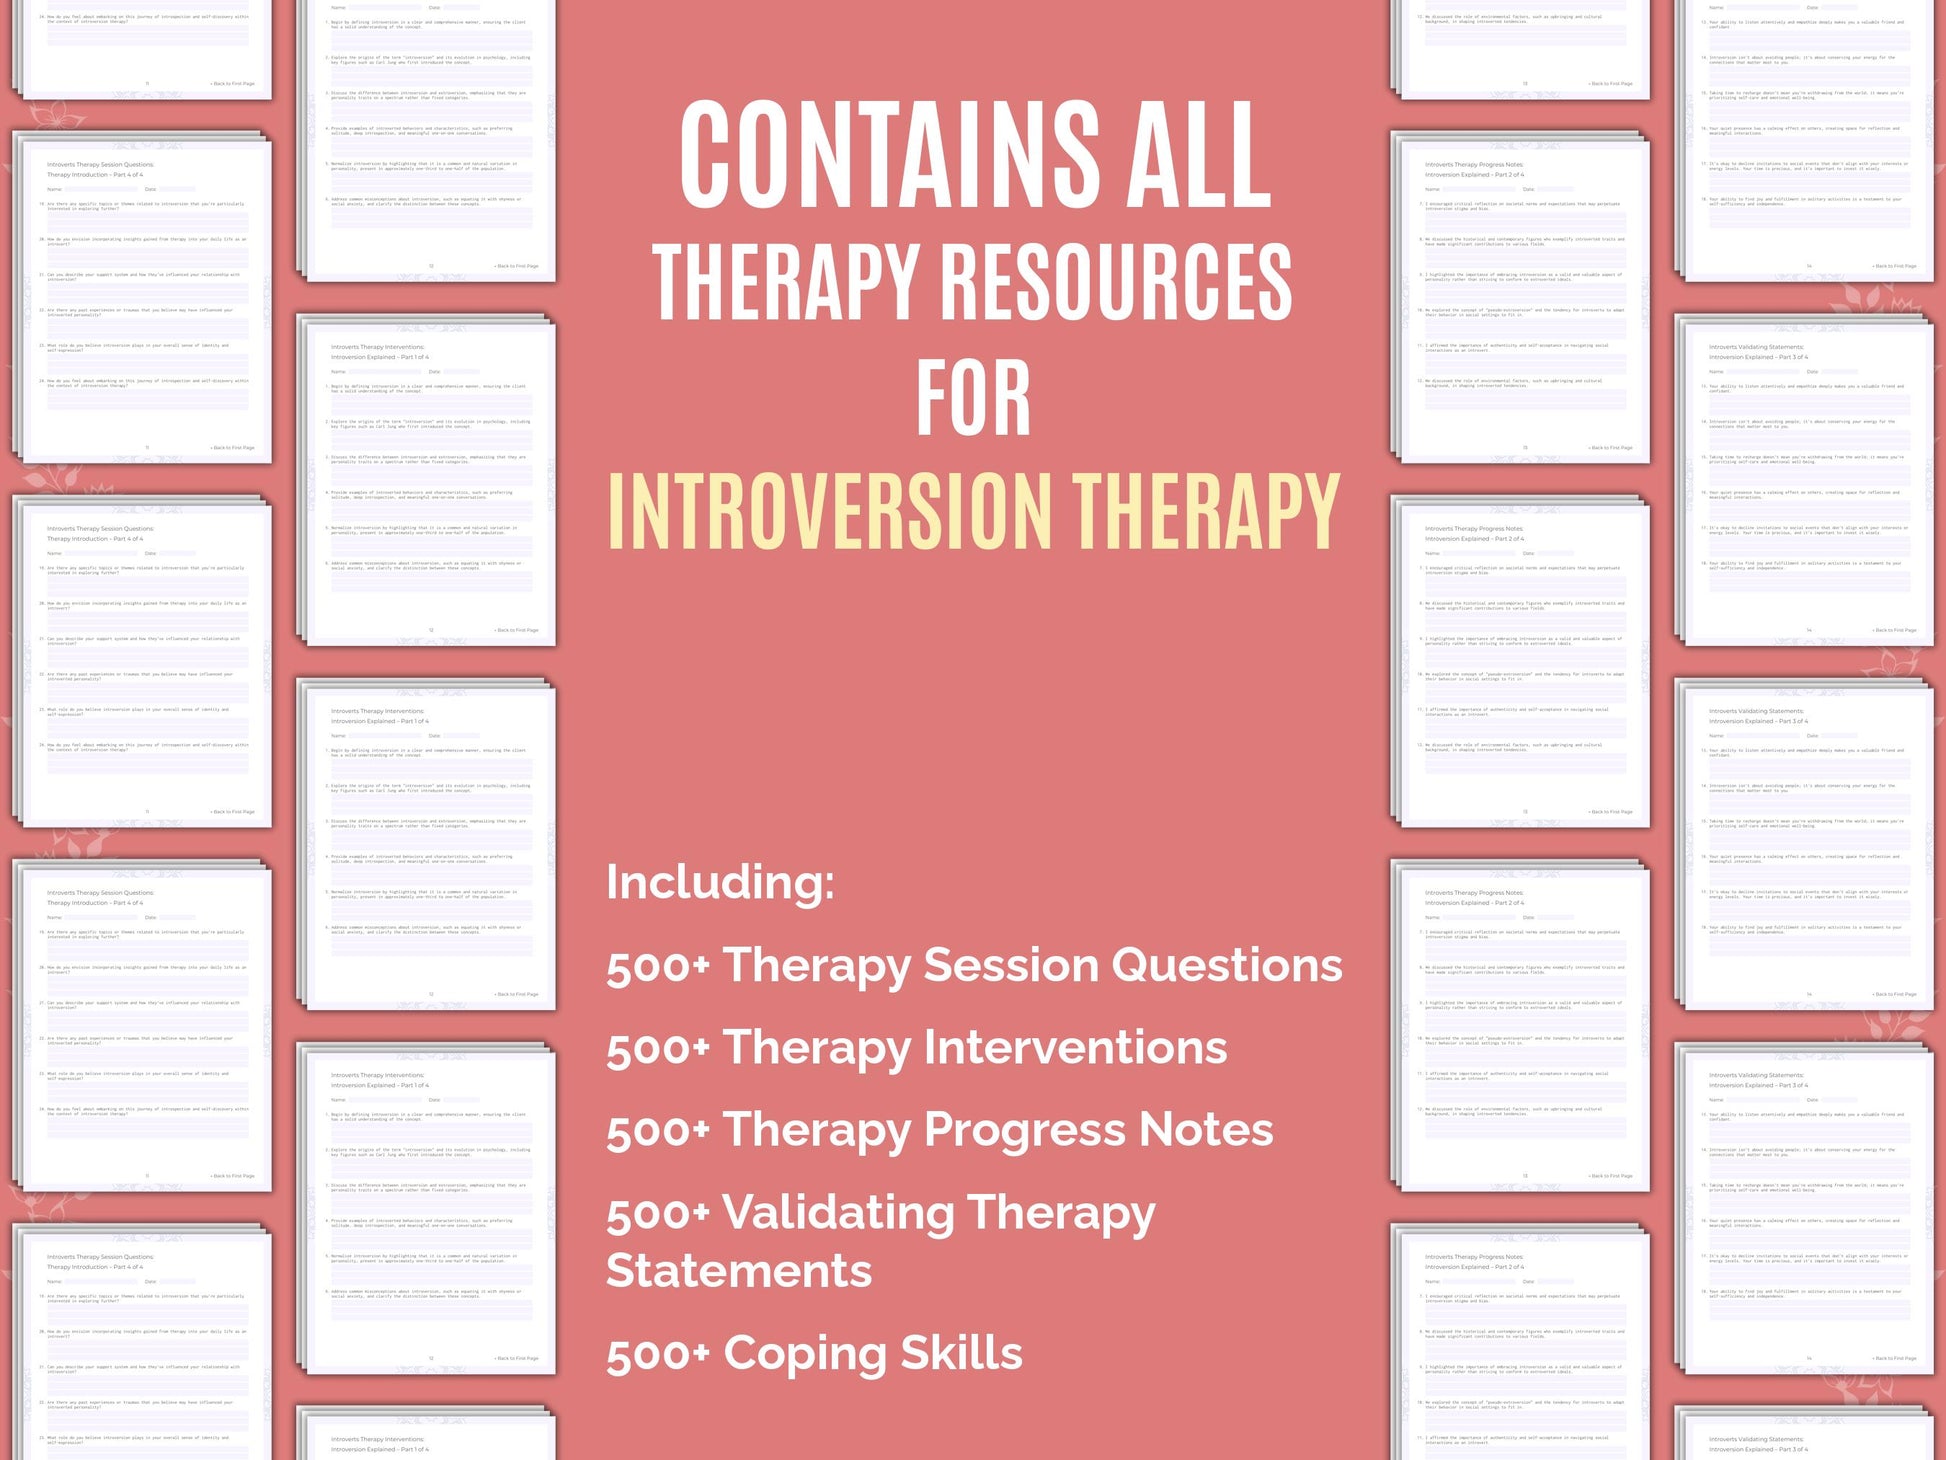 Validating Therapy Statements Resource